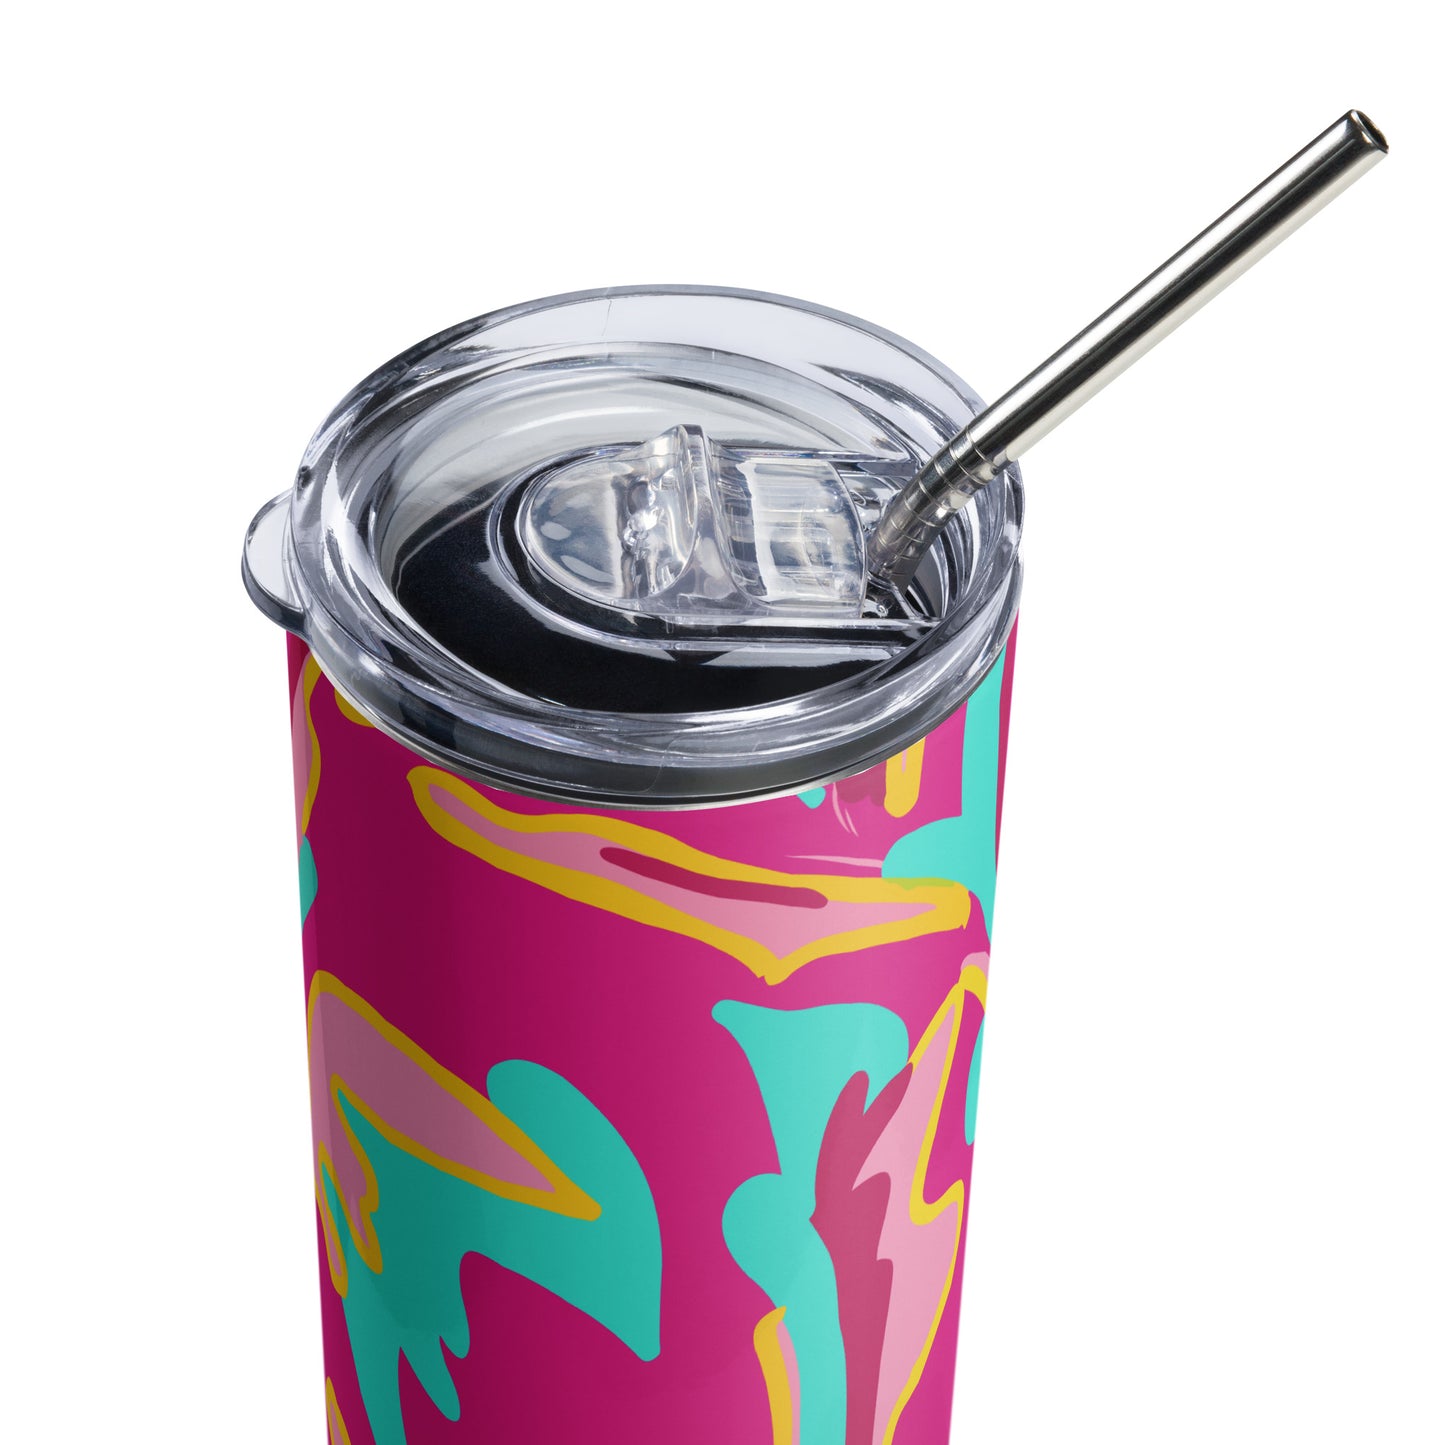 Embrace Body Love Stainless Steel Tumbler- Hot Pink